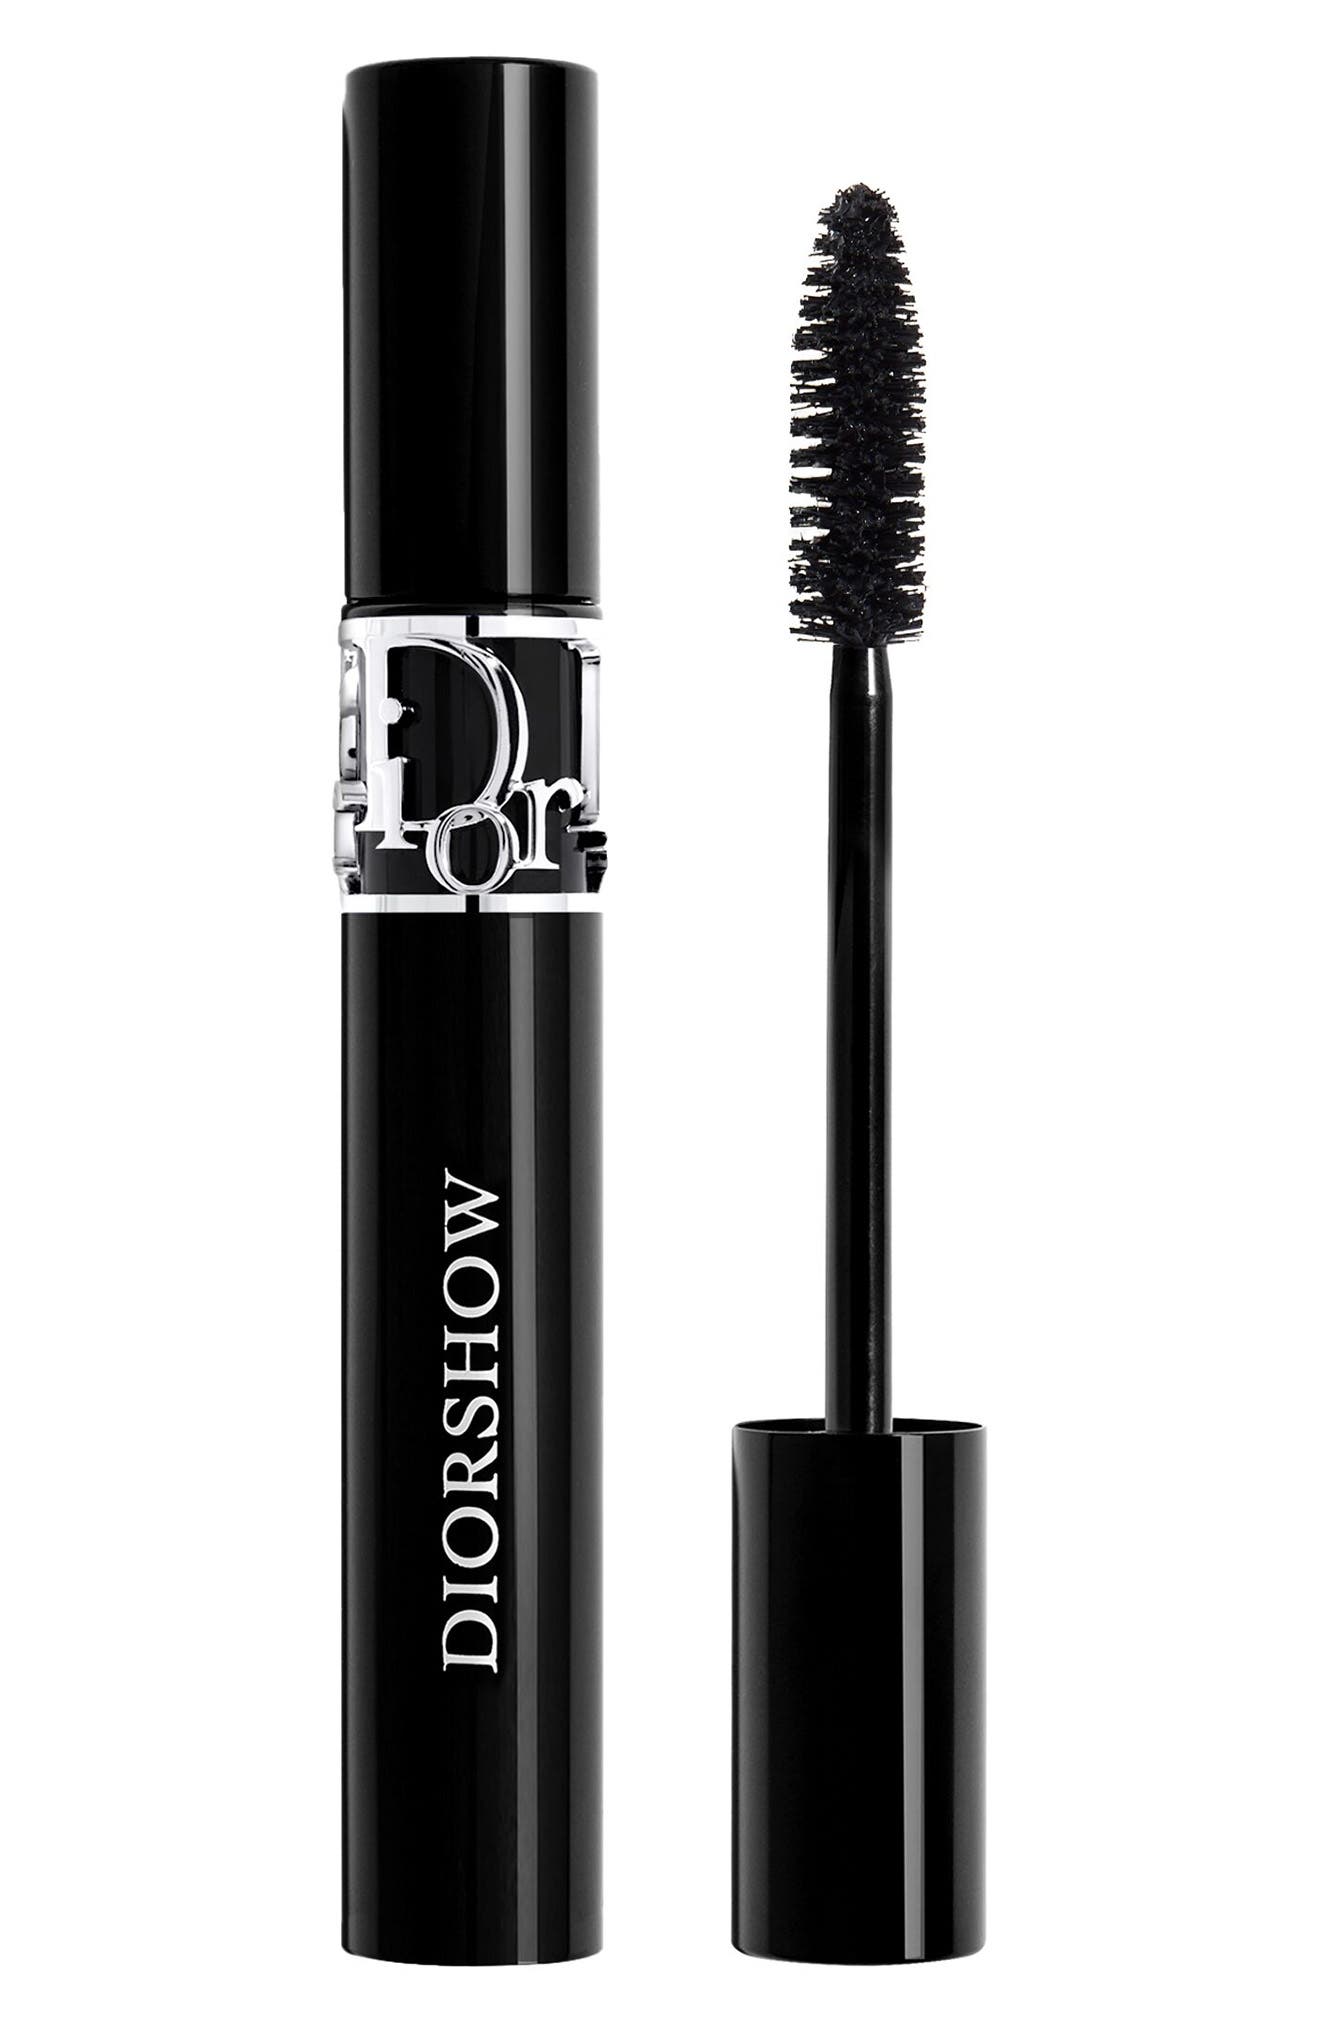 The Diorshow 24H Buildable Volume Mascara in 090 Noir /Black